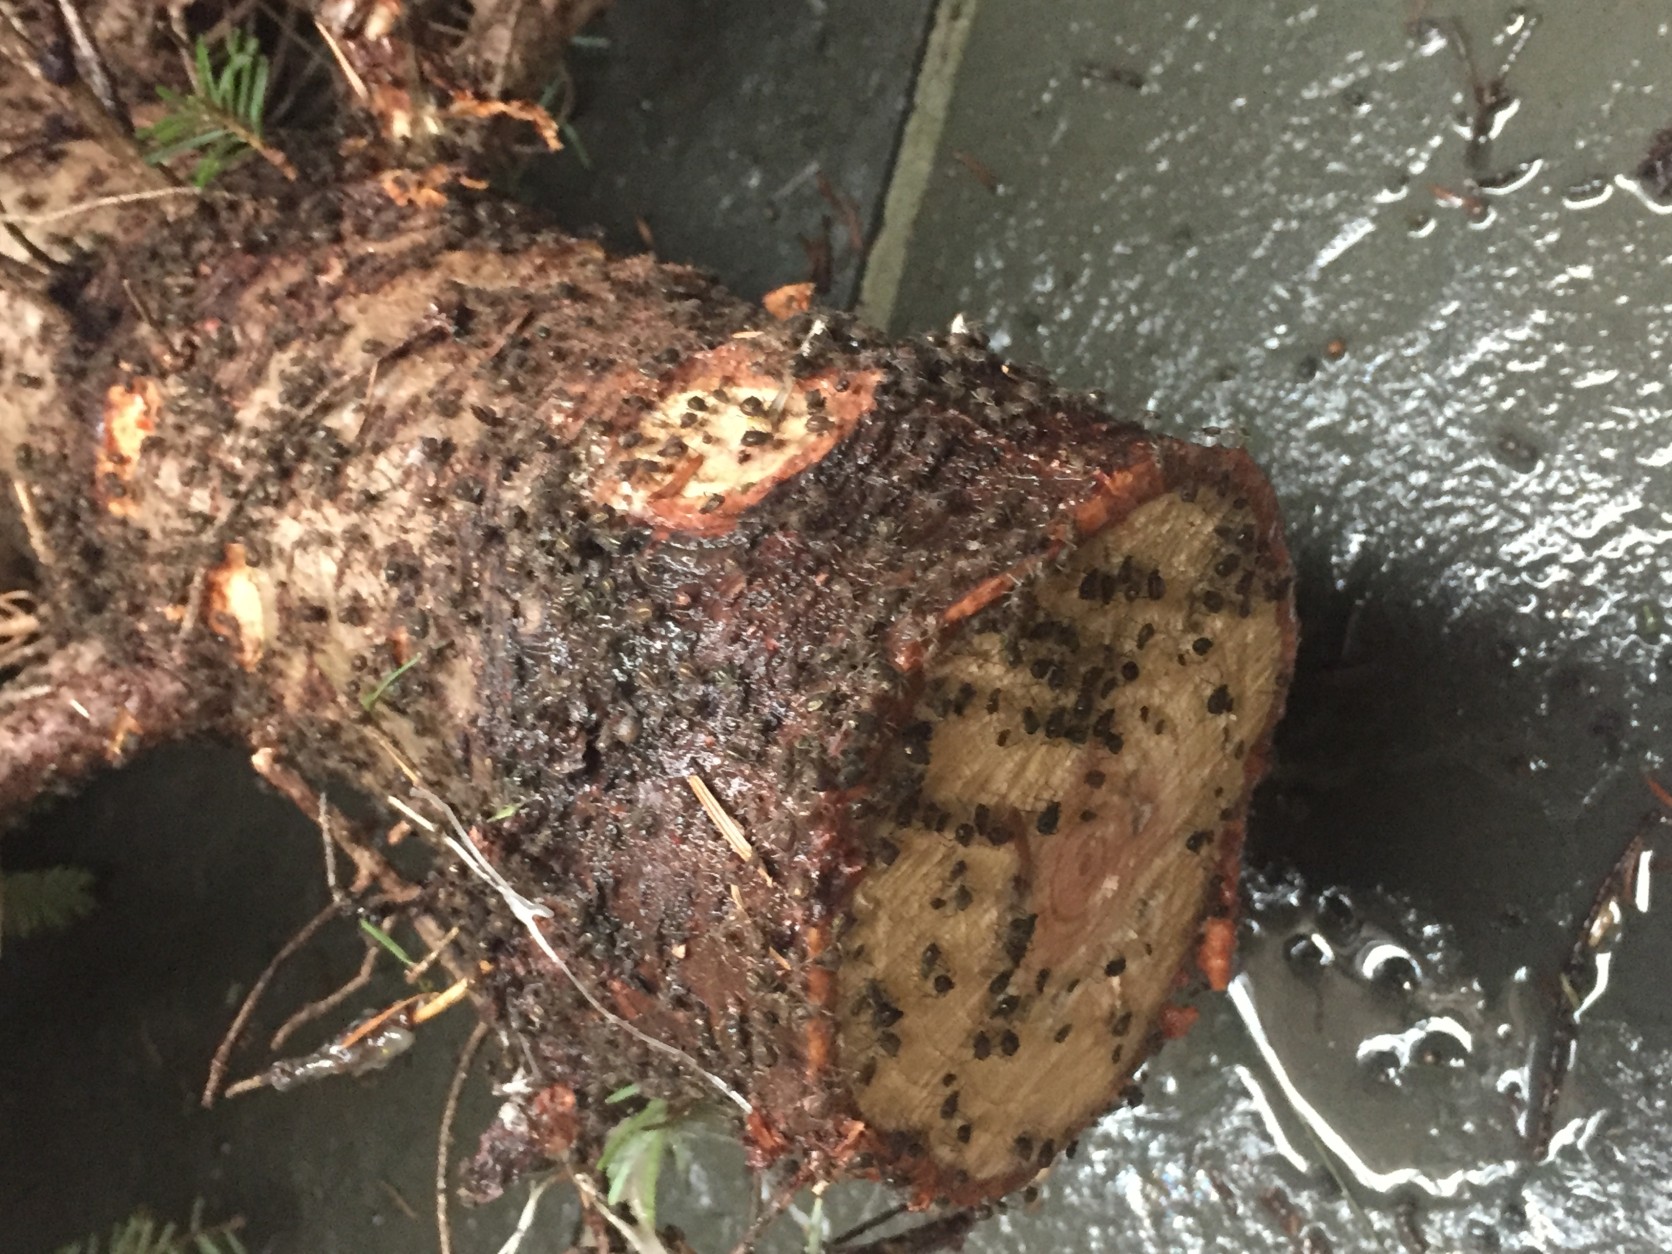 Just a few of the aphids that infested the Christmas tree of a D.C. woman. (Courtesy photo)